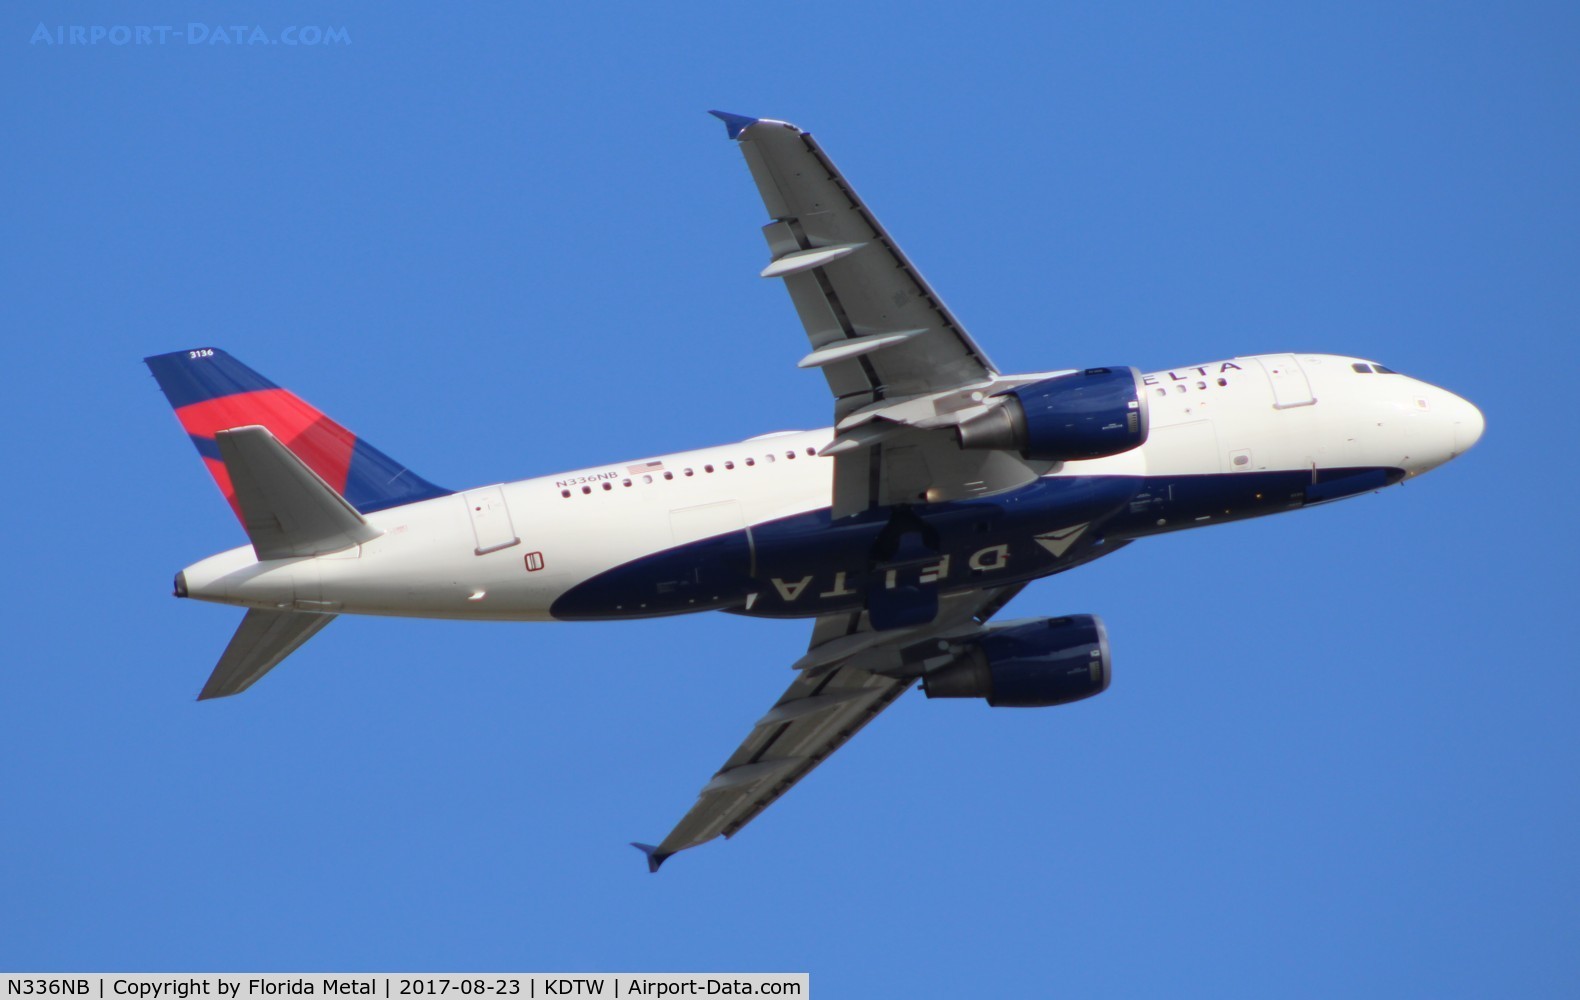 N336NB, 2002 Airbus A319-114 C/N 1683, DAL A319 zx DTW-DCA